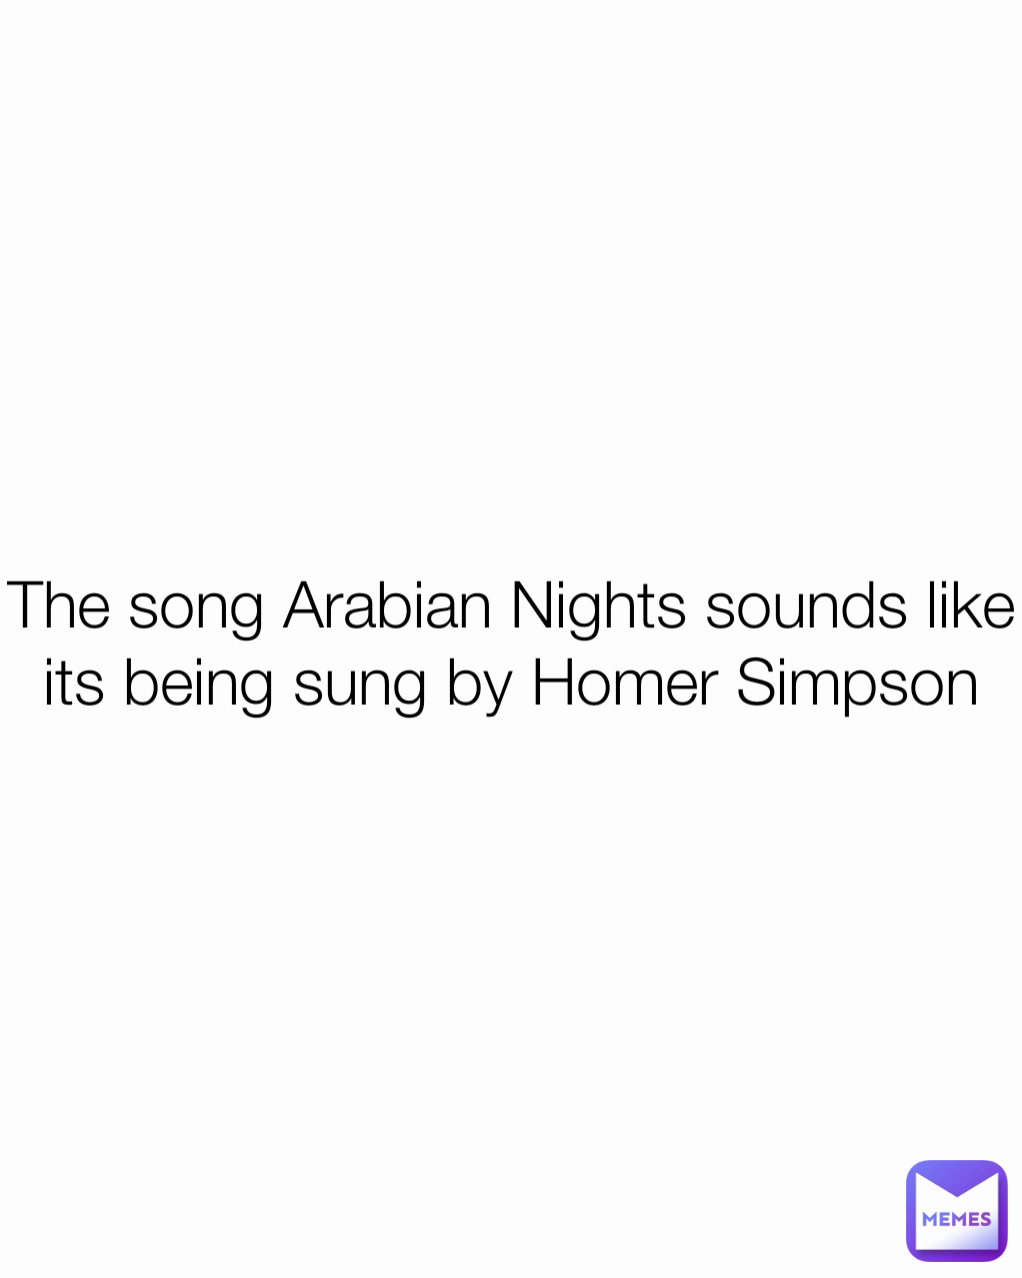 The song Arabian Nights sounds like its being sung by Homer Simpson